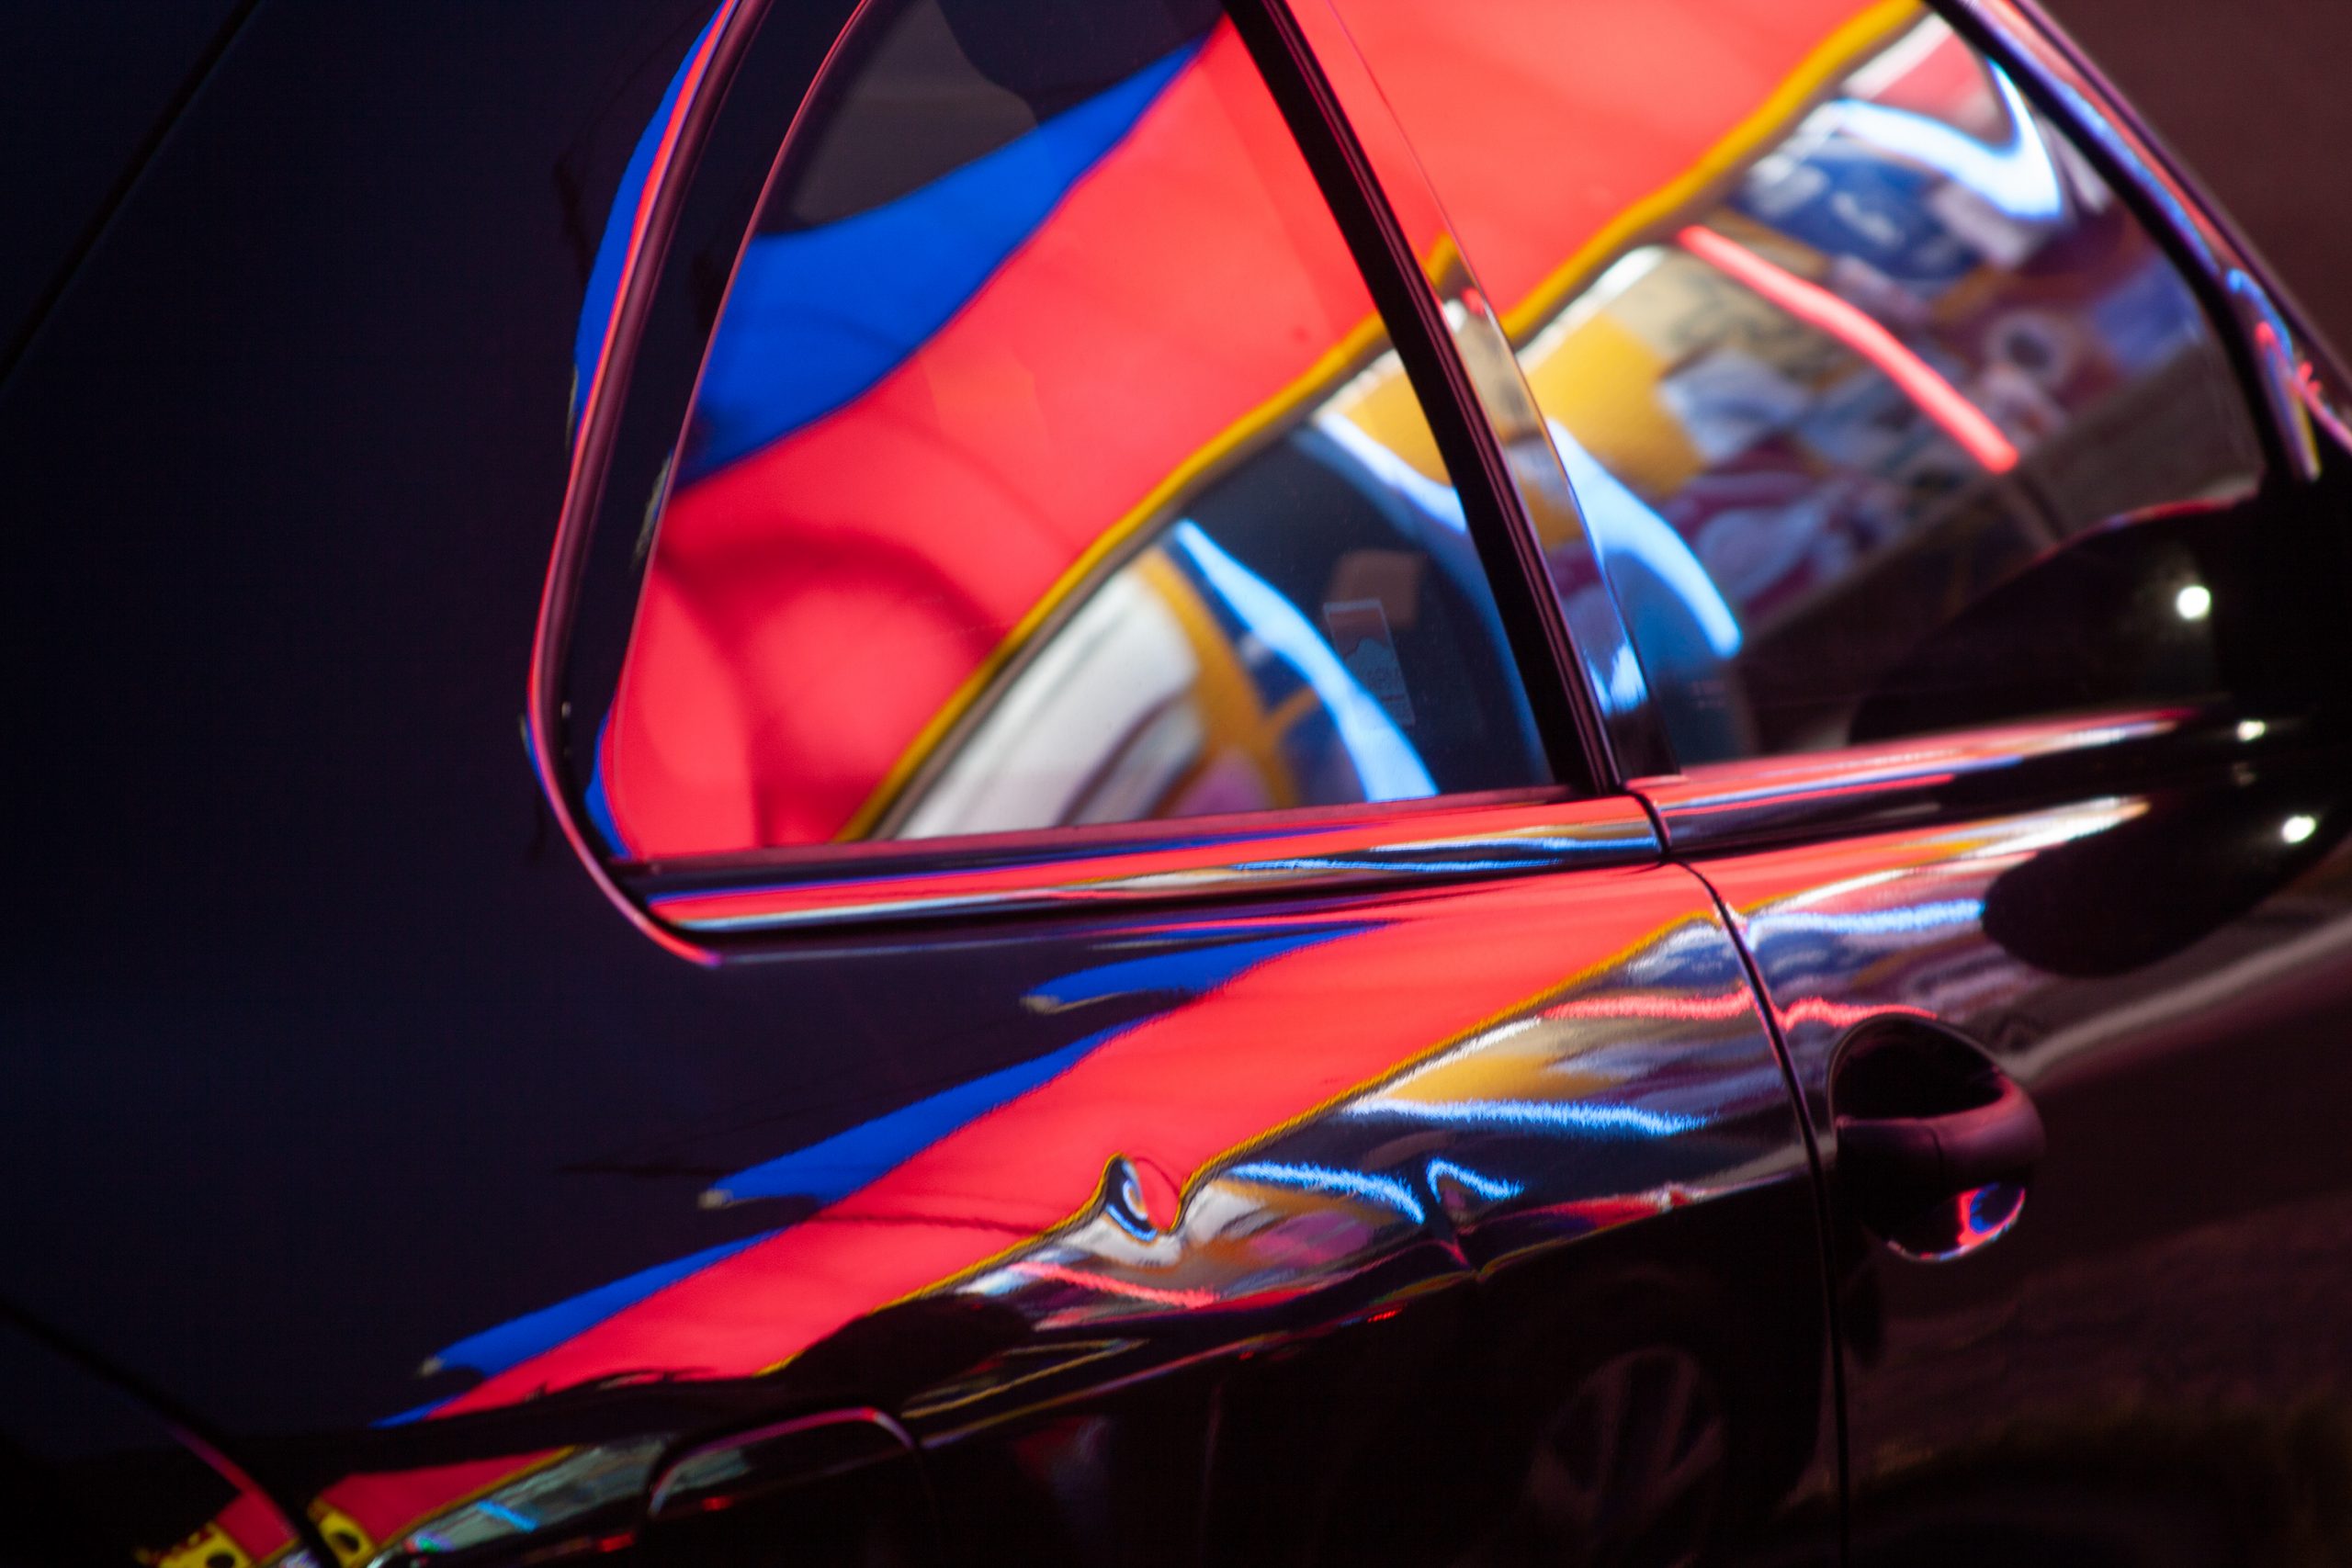 Neon color reflections create a vibrant abstract pattern on a patron’s car. 
